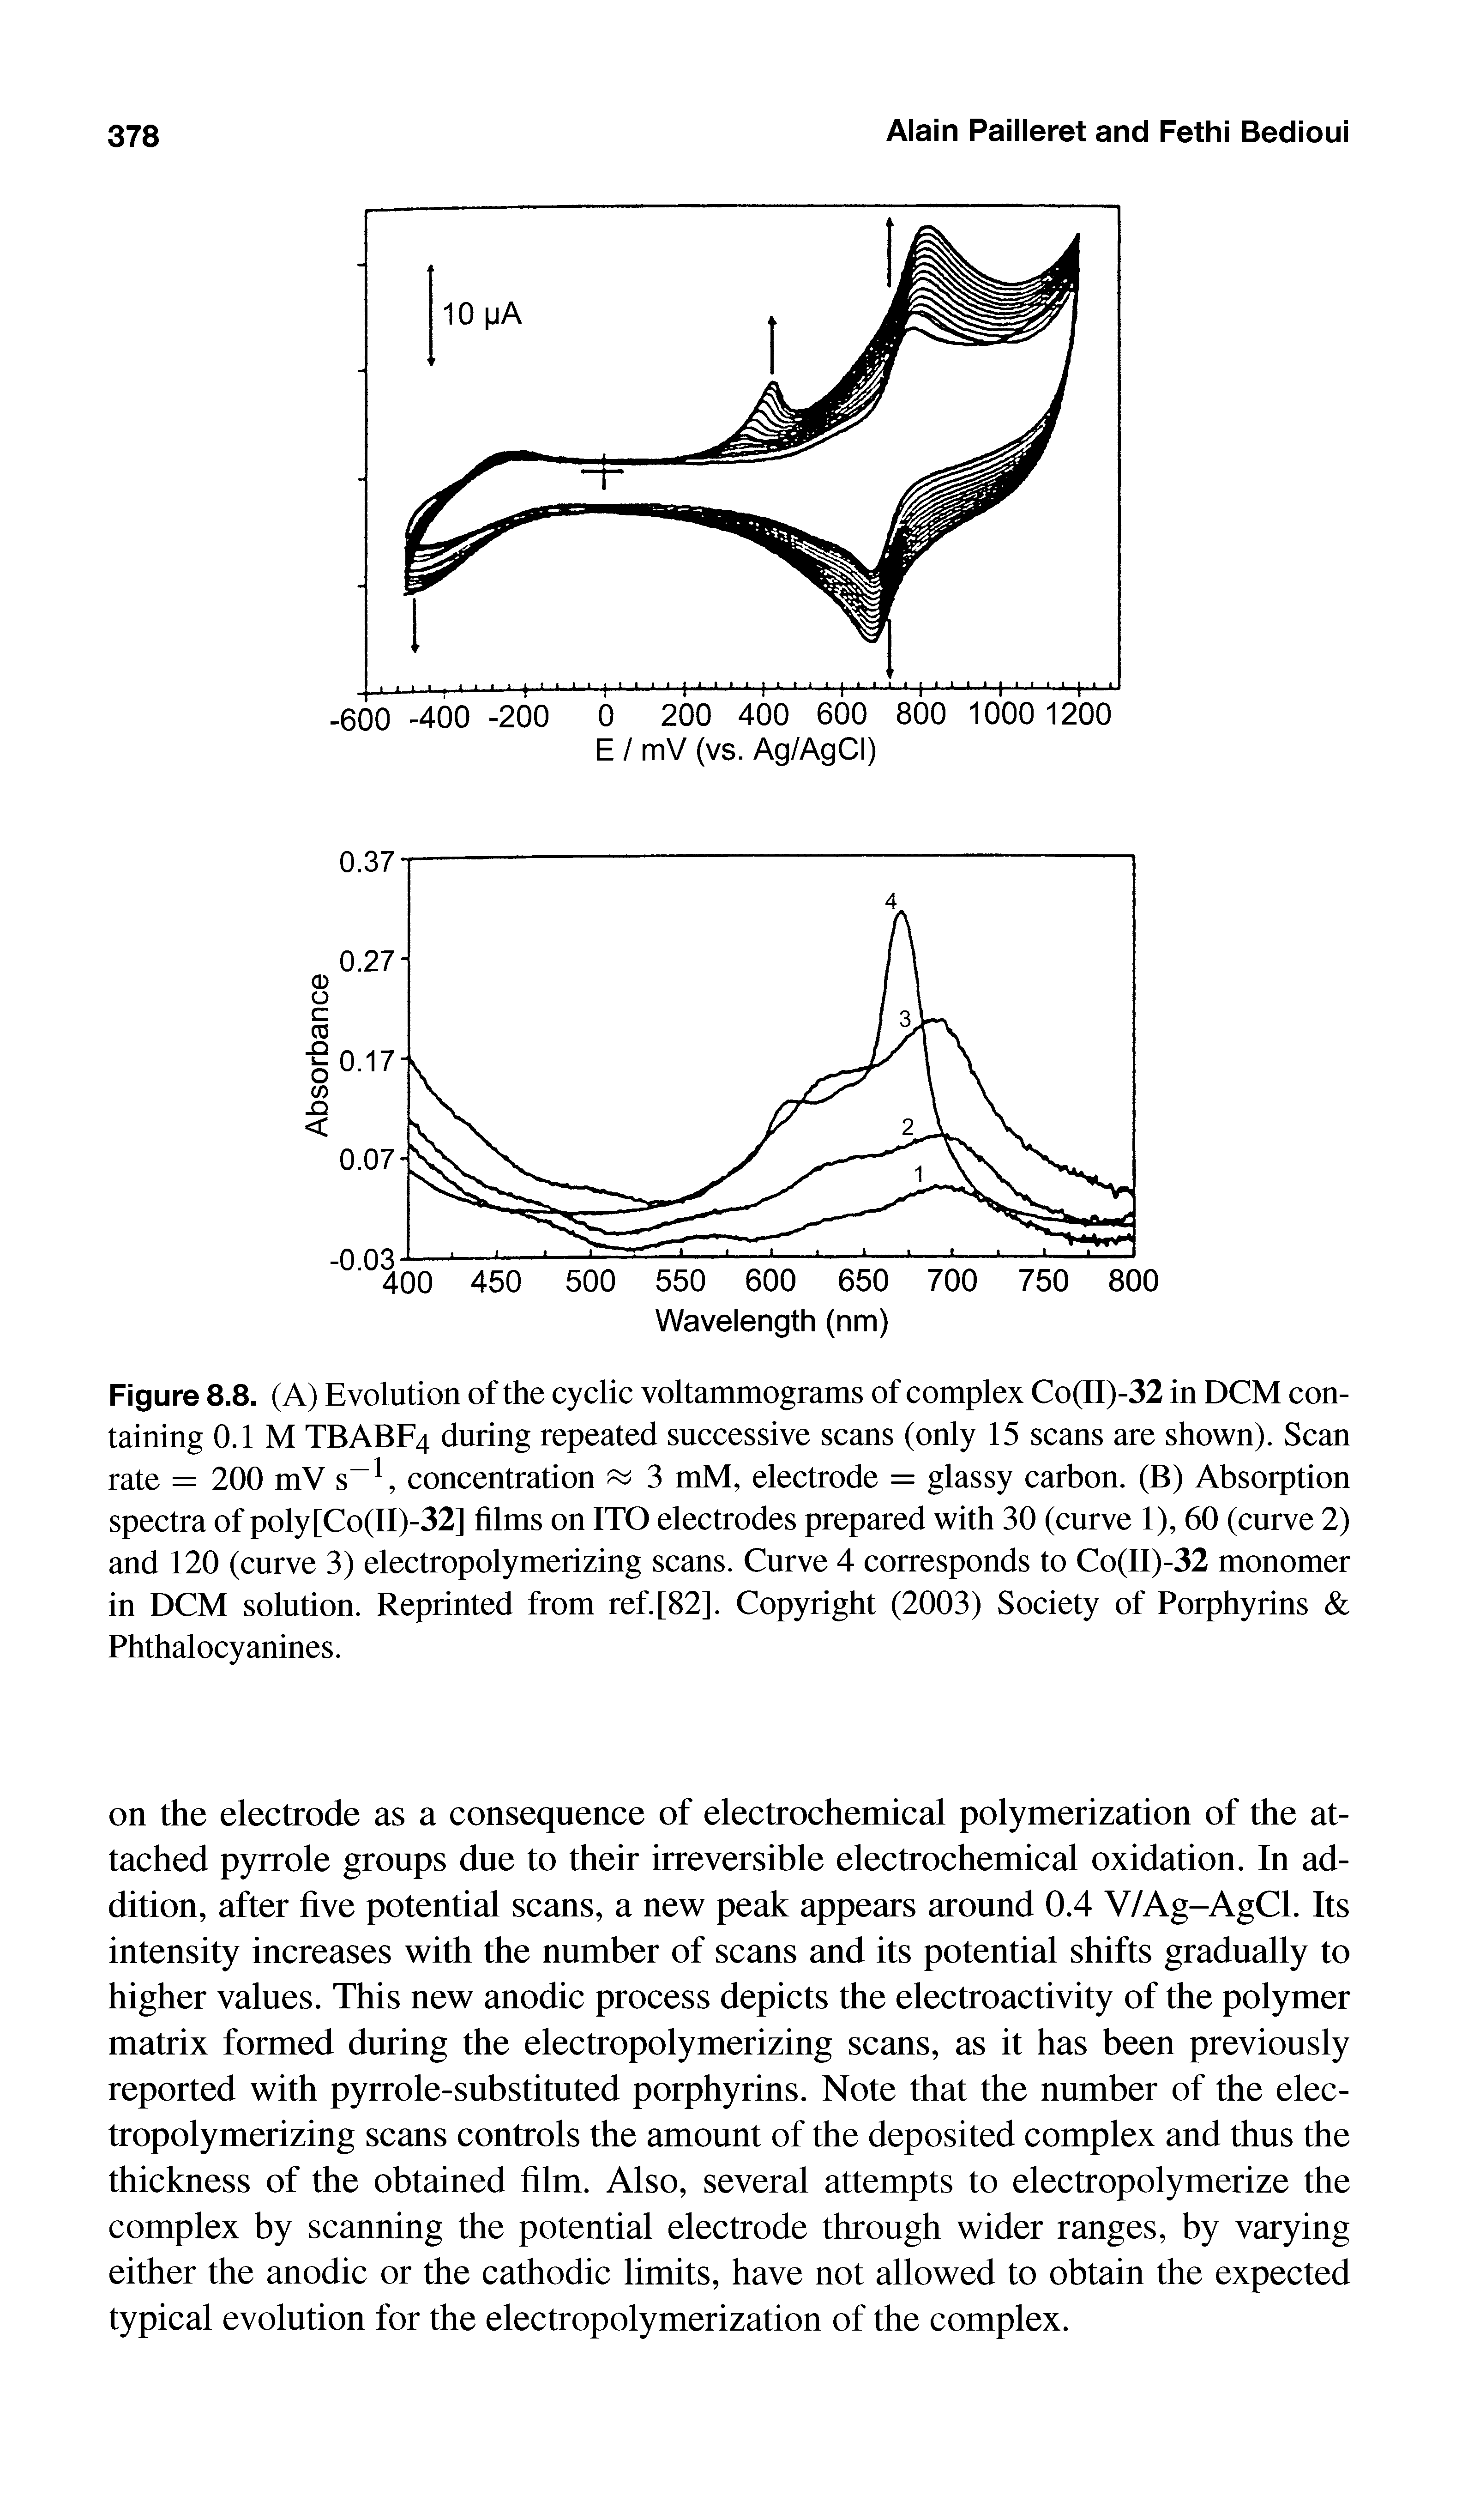 Figure 8.8. (A) Evolution of the cyclic voltammograms of complex Co(II)-32 in DCM containing 0.1 M TBABF4 during repeated successive scans (only 15 scans are shown). Scan rate = 200 mV s , concentration 3 mM, electrode = glassy carbon. (B) Absorption spectra of poly[Co(II)-32] films on ITO electrodes prepared with 30 (curve 1), 60 (curve 2) and 120 (curve 3) electropolymerizing scans. Curve 4 corresponds to Co(II)-32 monomer in DCM solution. Reprinted from ref. [82]. Copyright (2003) Society of Porphyrins Phthalocyanines.